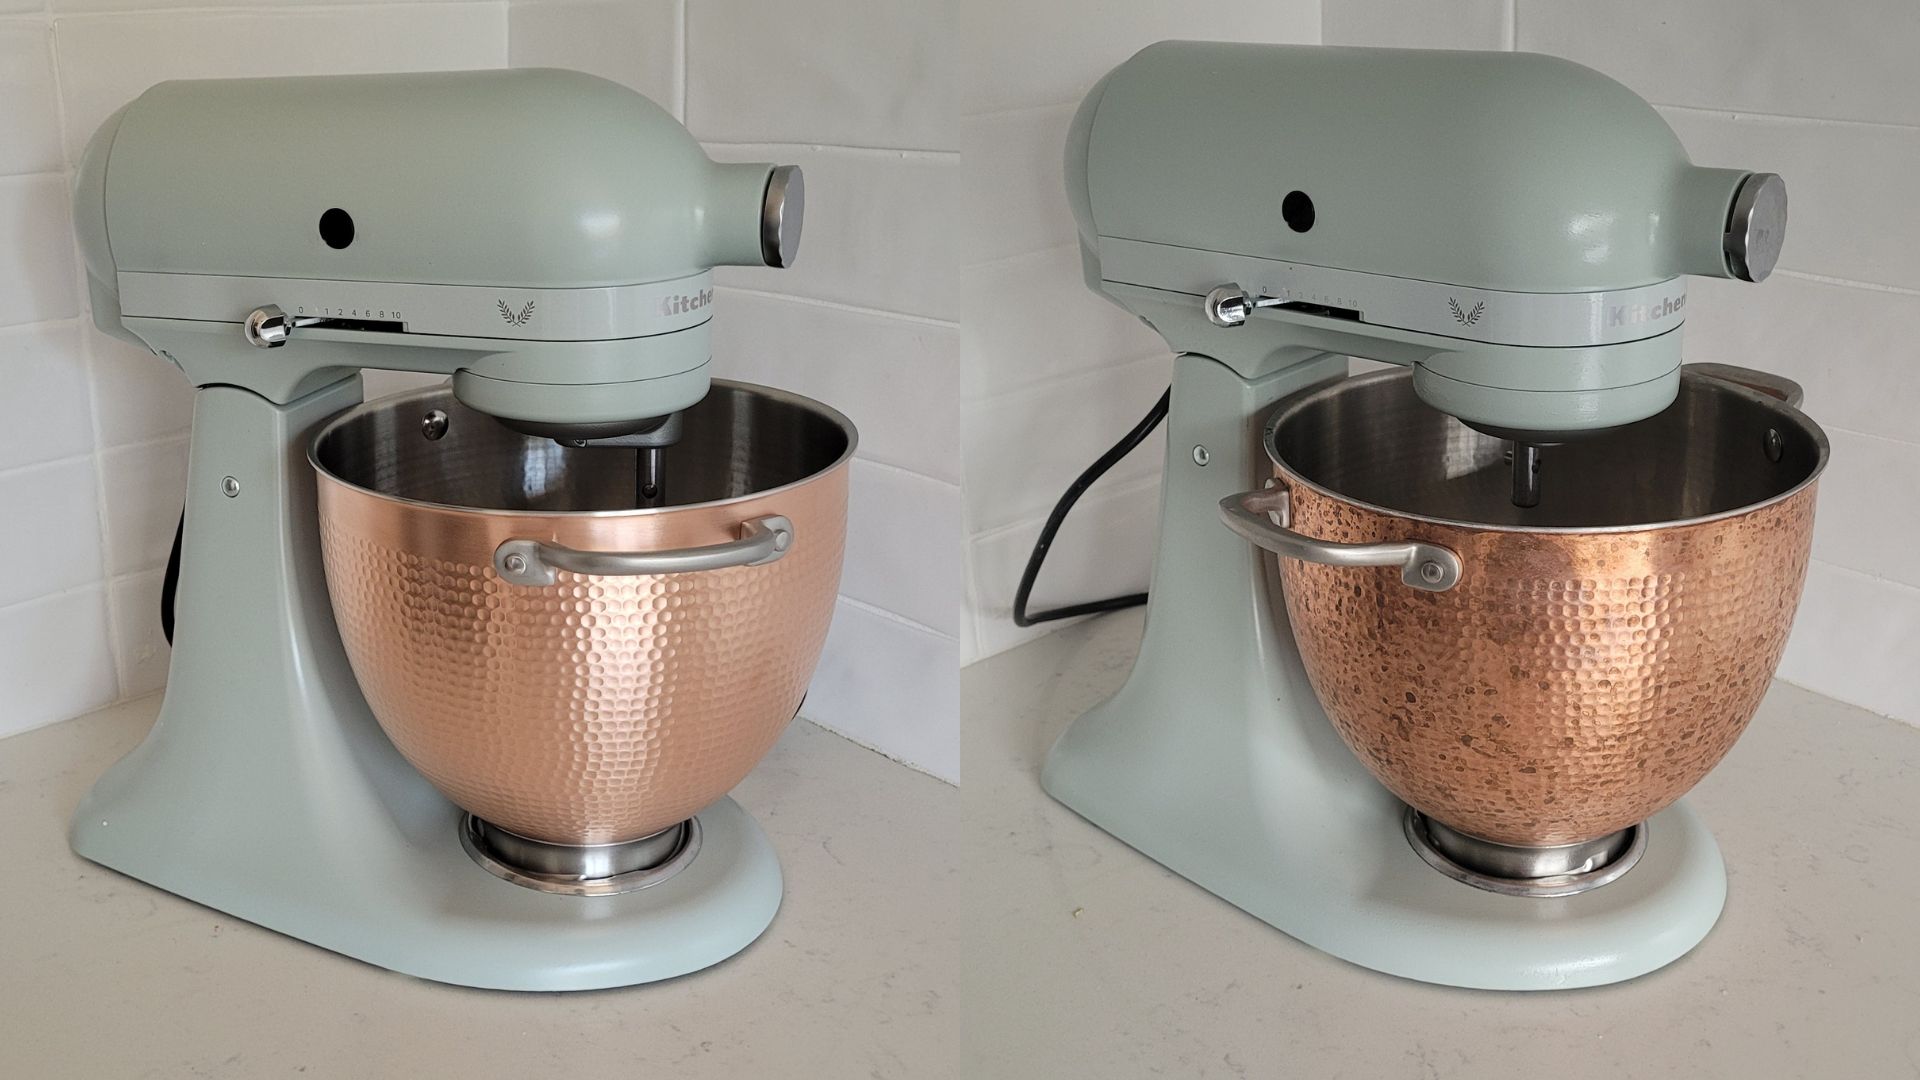 The New Blossom KitchenAid Stand Mixer Is Here